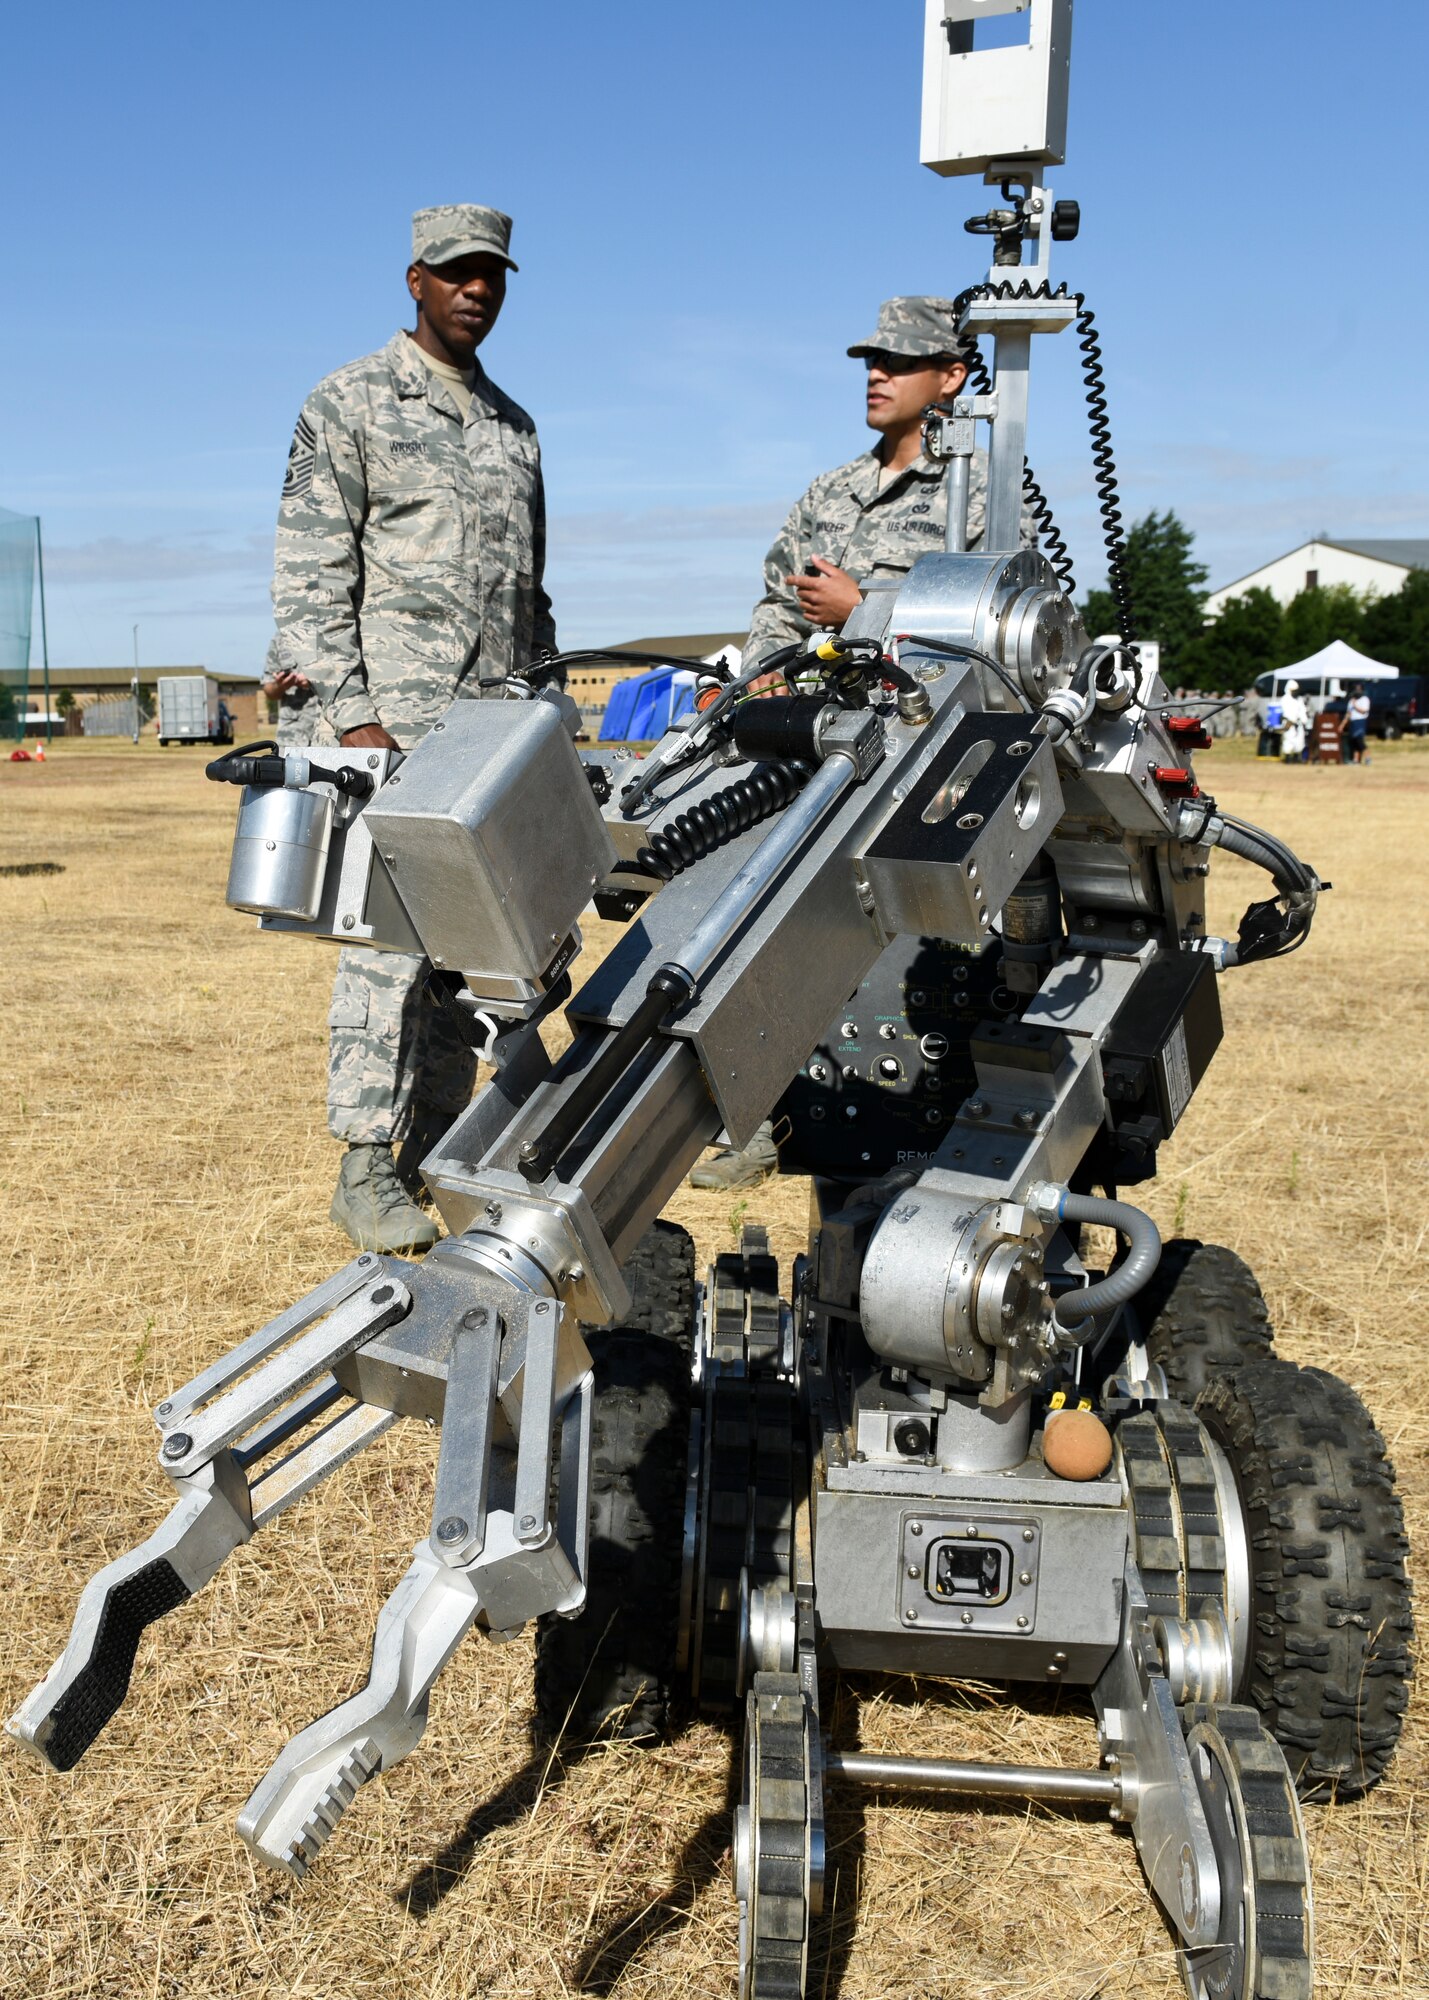 Chief Master Sgt. of the Air Force Kaleth O. Wright examines an explosive ordnance disposal robot during an immersion tour, Aug. 1, 2018 at Royal Air Force Lakenheath, England. Wright was briefed on the procedures EOD Airmen follow while using the EOD disposal robot during operations. (U.S. Air Force photo/Airman 1st Class Christopher S. Sparks)